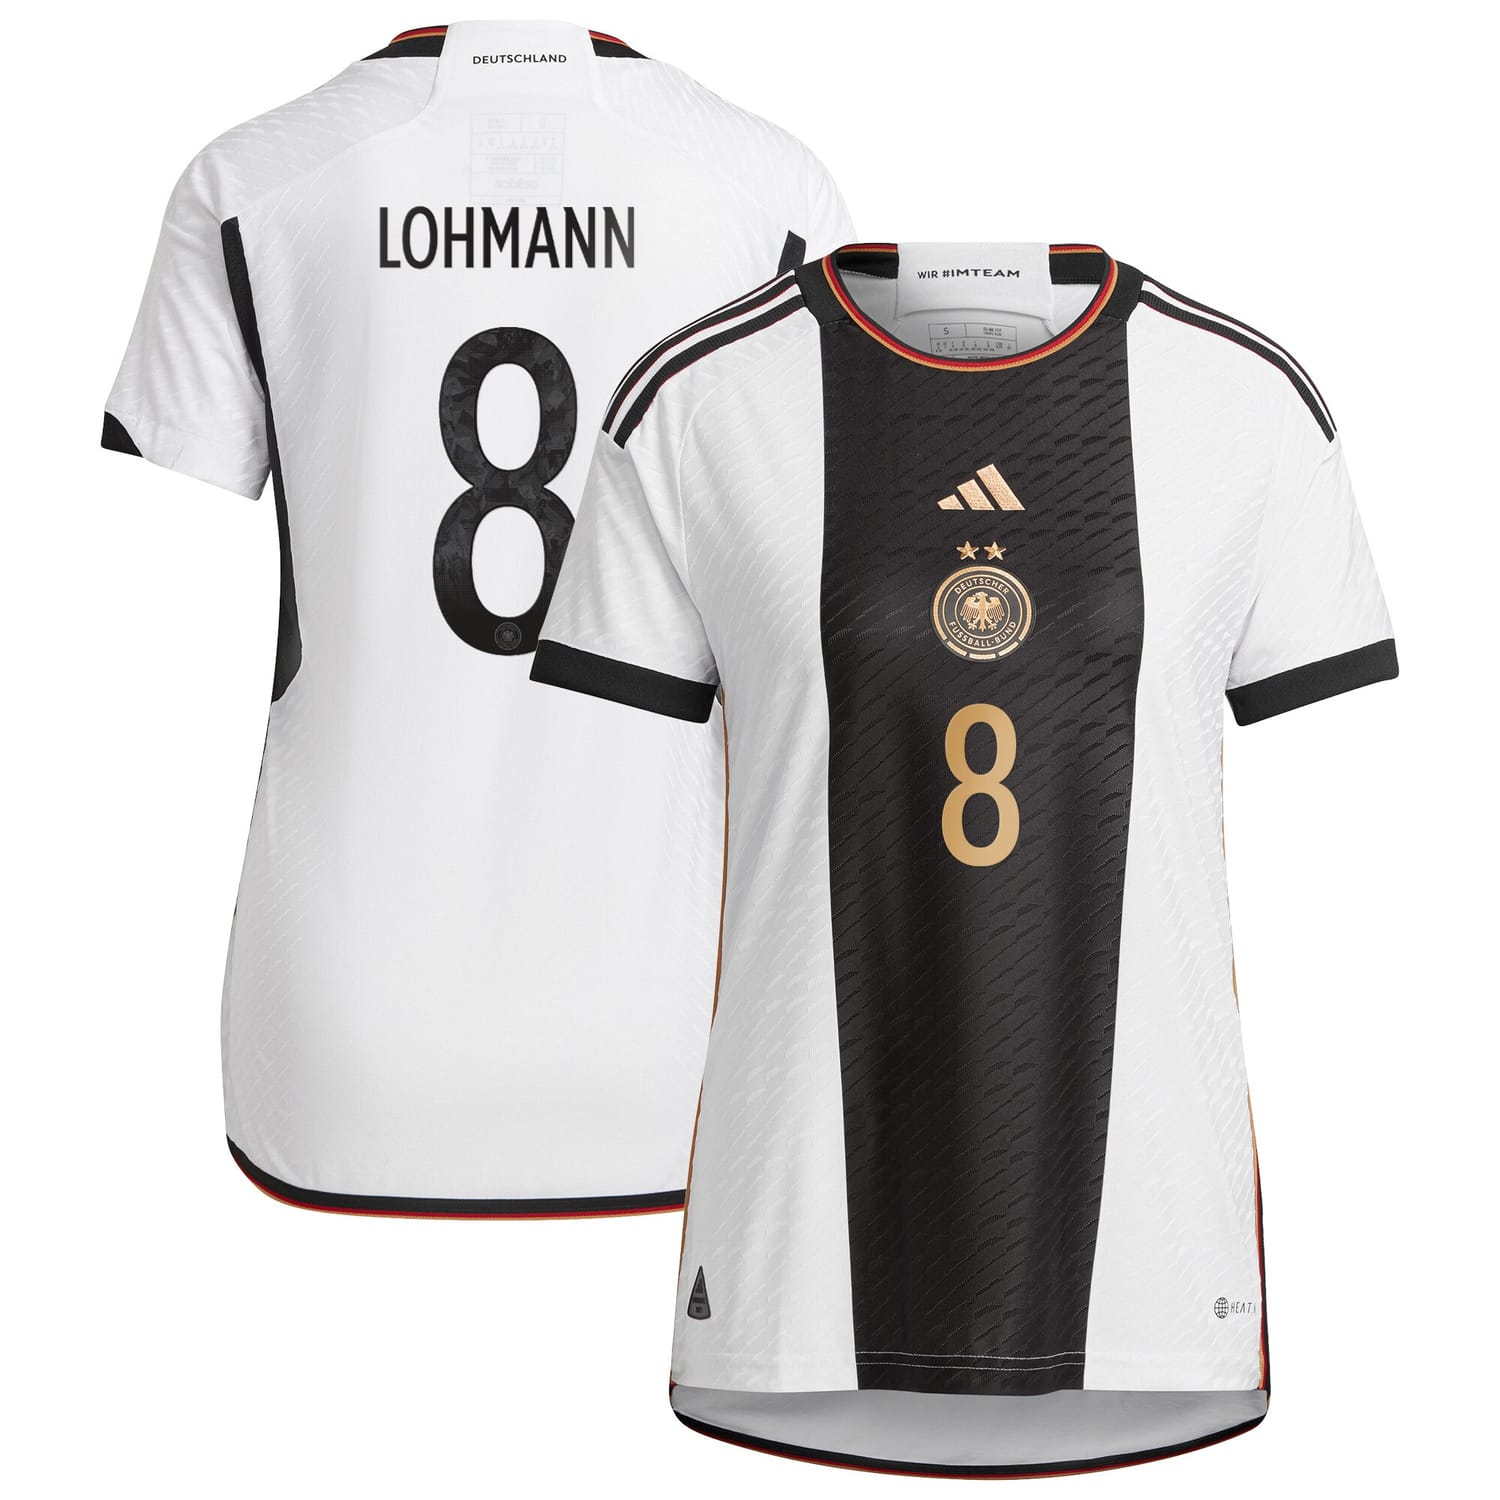 Germany National Team Home Authentic Jersey Shirt player Sydney Lohmann 8 printing for Women